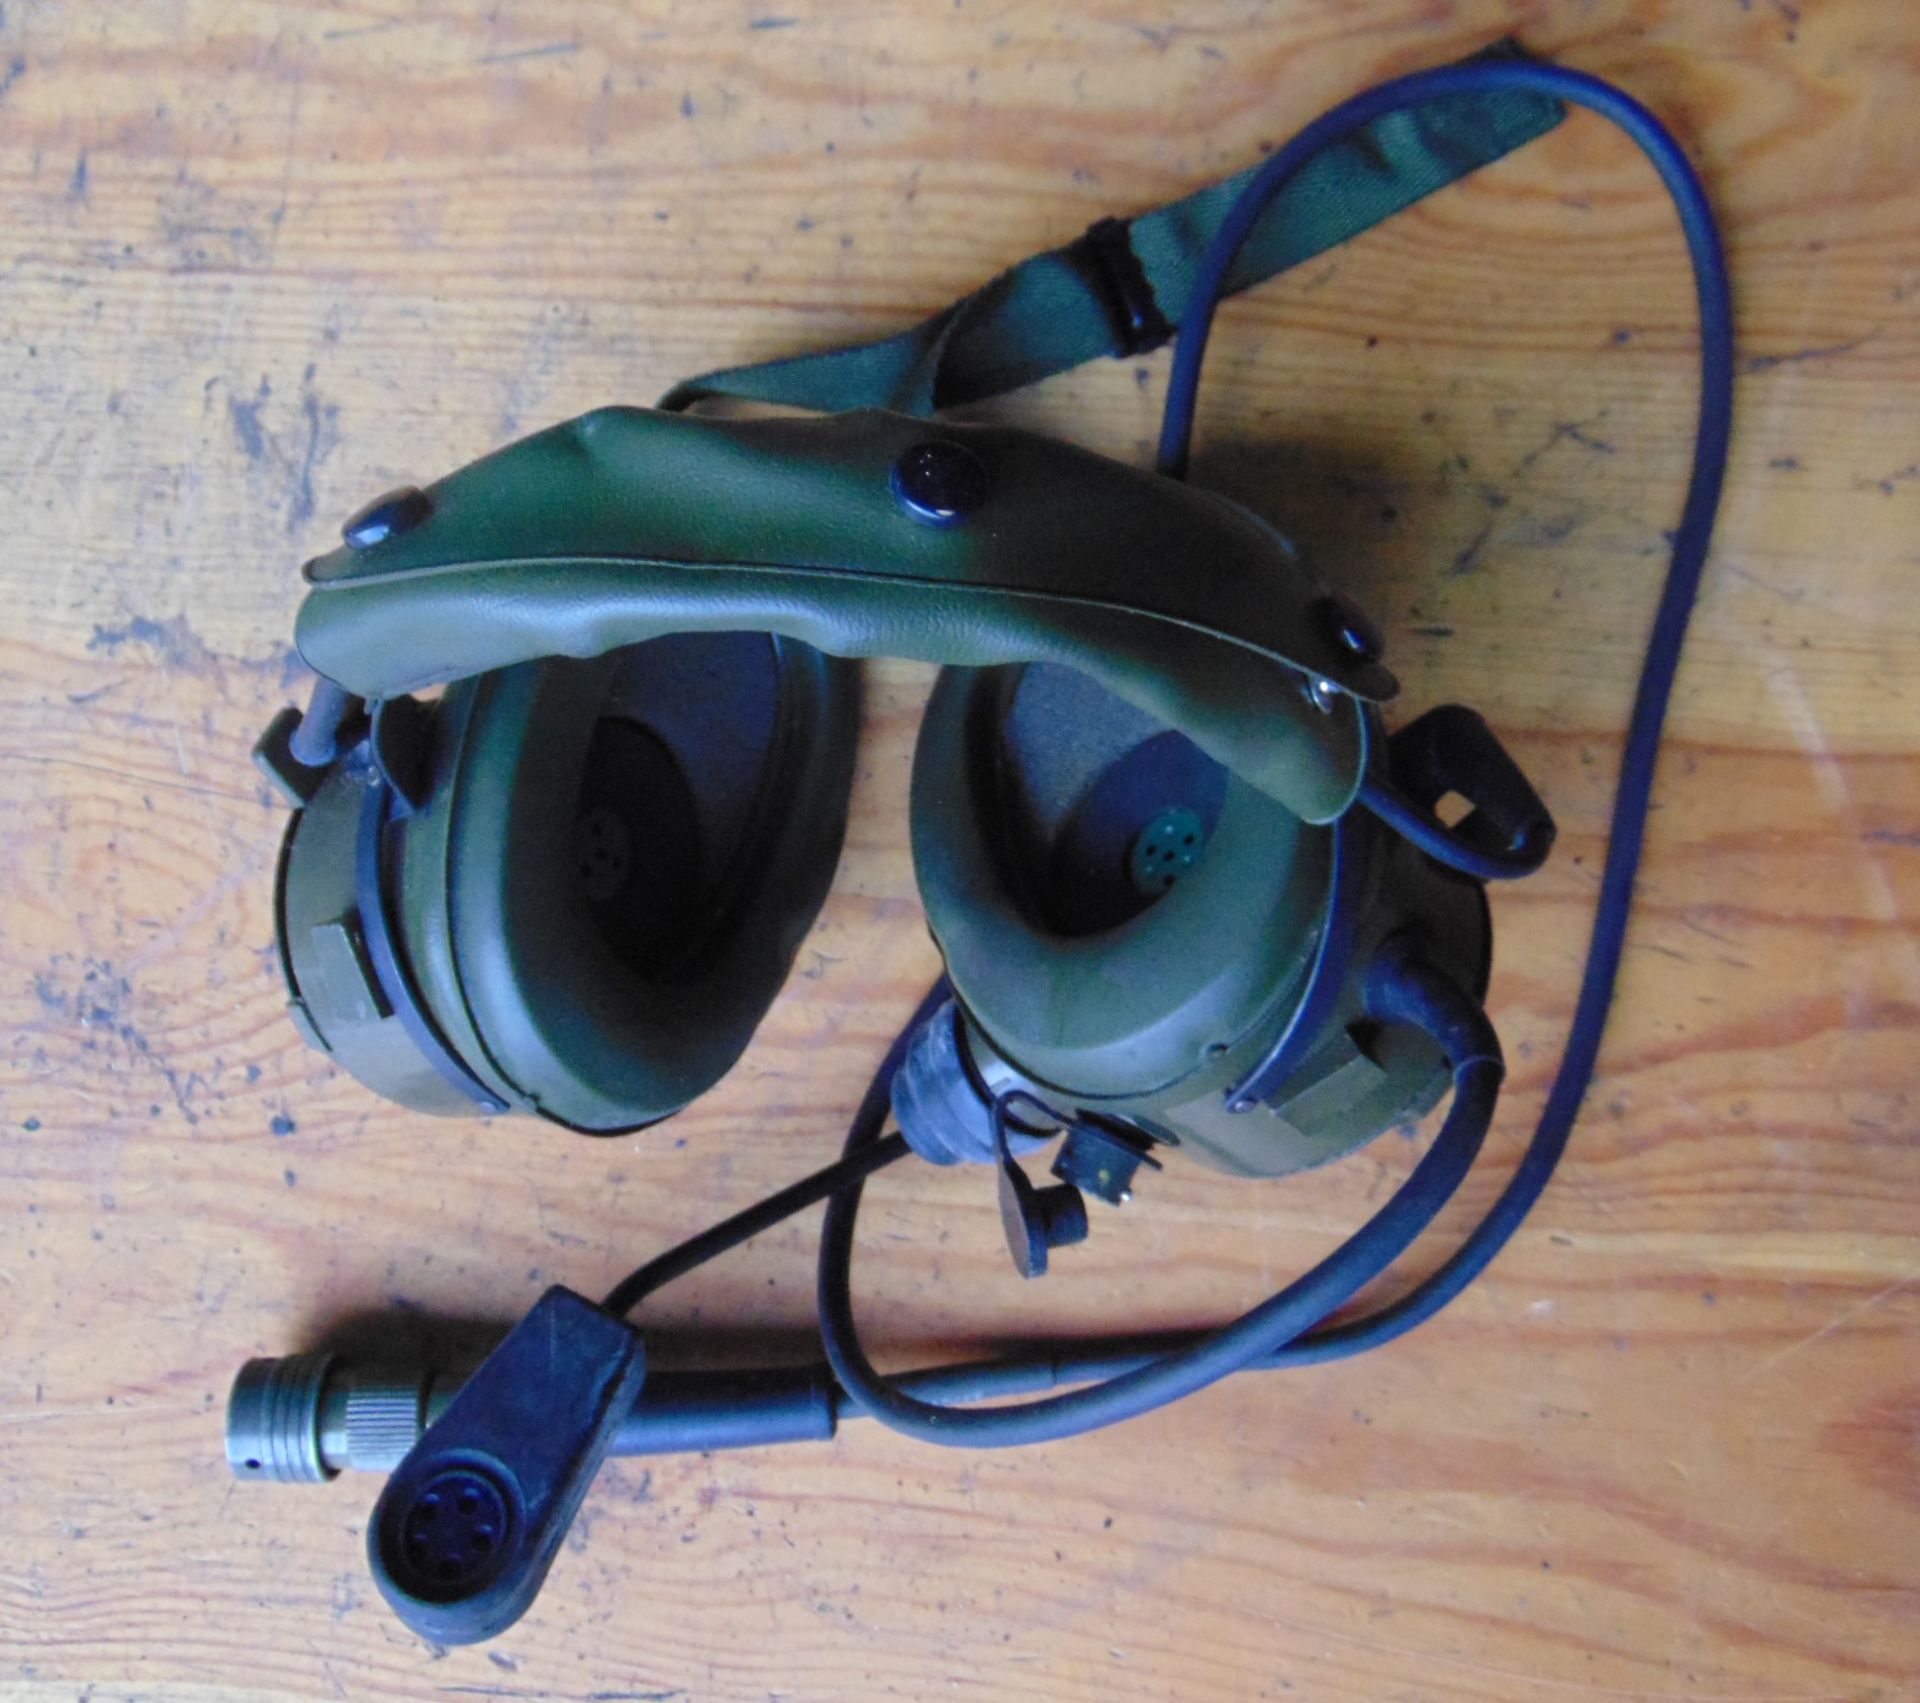 22 x Clansman Headsets - Image 4 of 4